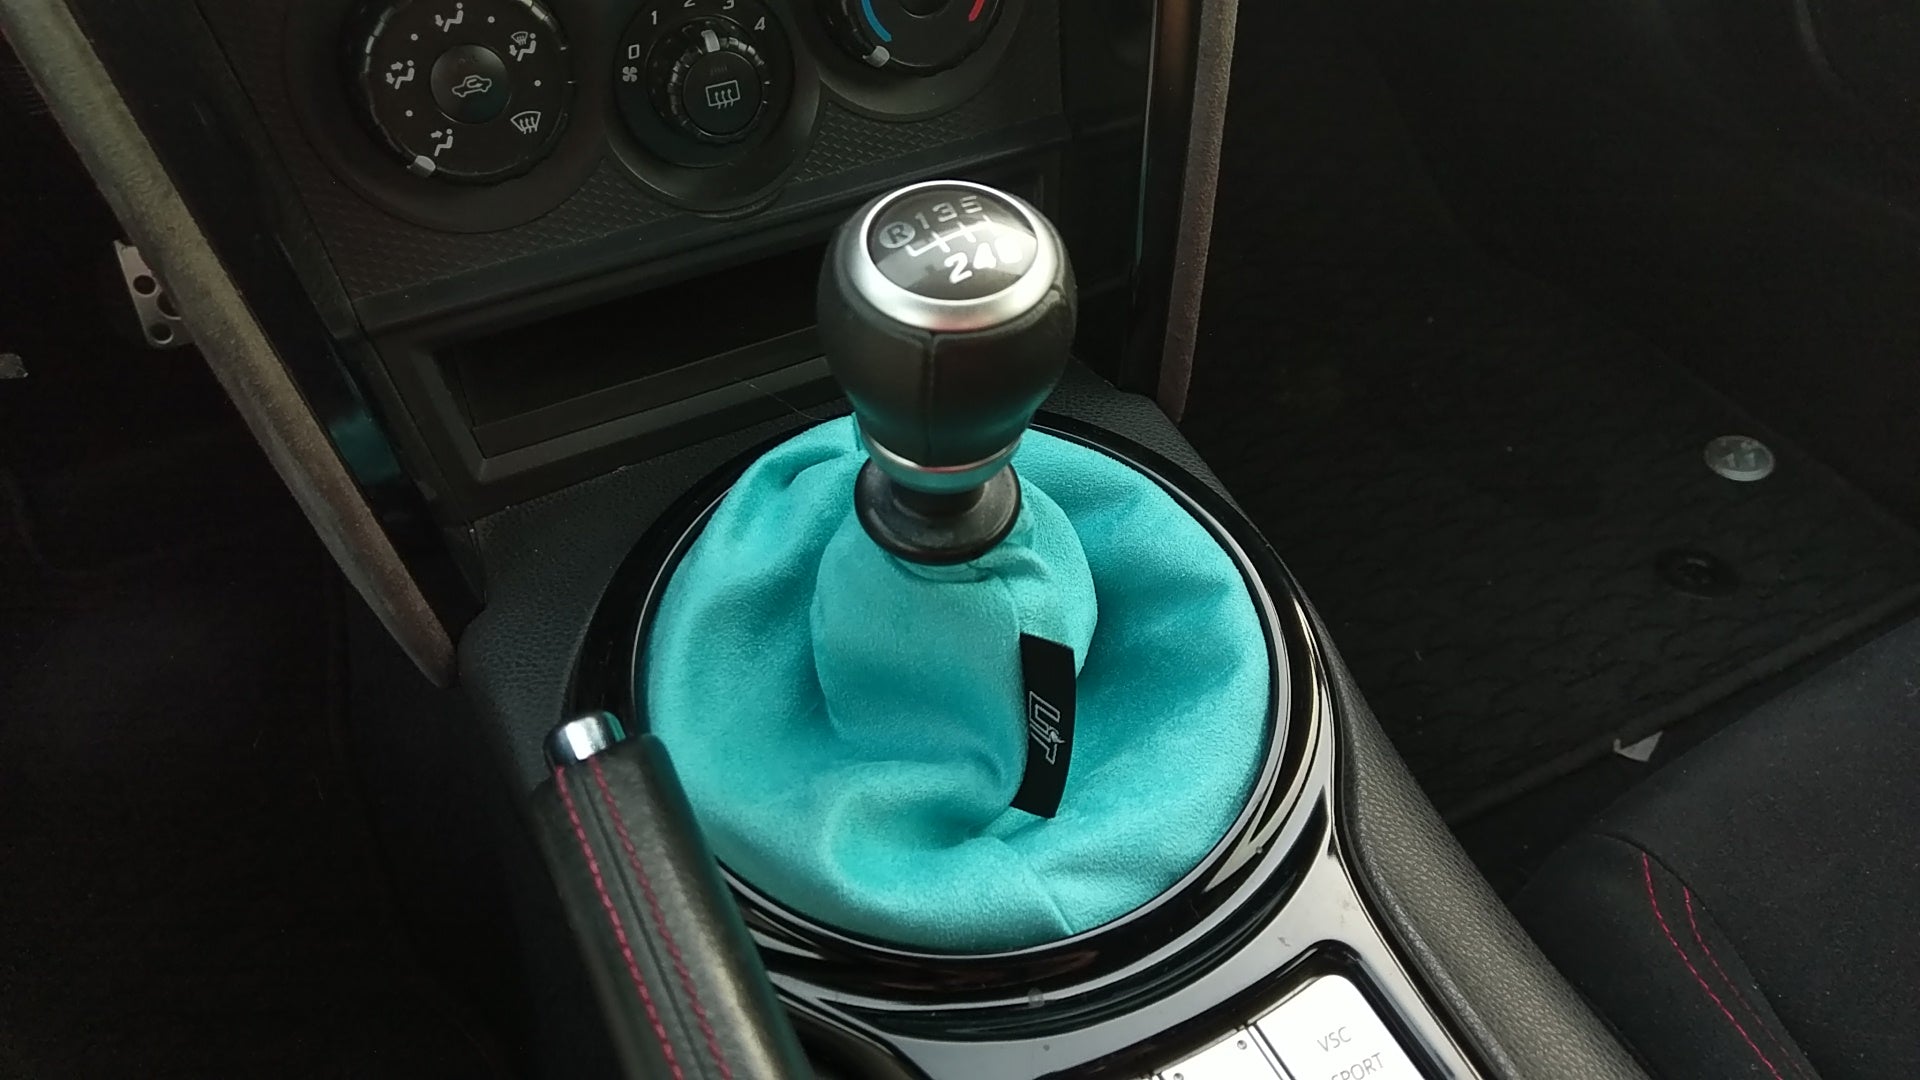 teal blue Shift Boot , shift boot cover , shift boot cover for automatic , shift boot  wrx , shift boot cover gt86 , shift boot and ebrake boot , gear shift boot cover , jdm shift boot cover , gt86 shift boot , brz shift boot , sti shift boot , gtr shift boot , supra shift boot , silvia s13 shift boot , silvia s14 shift boot , 350z shift boot cover , 370z shift boot , shift boot retainer , shift boot ring , shift boot for cars , evo shift boot cover , dsg shift boot cover , universal shift boot cover 